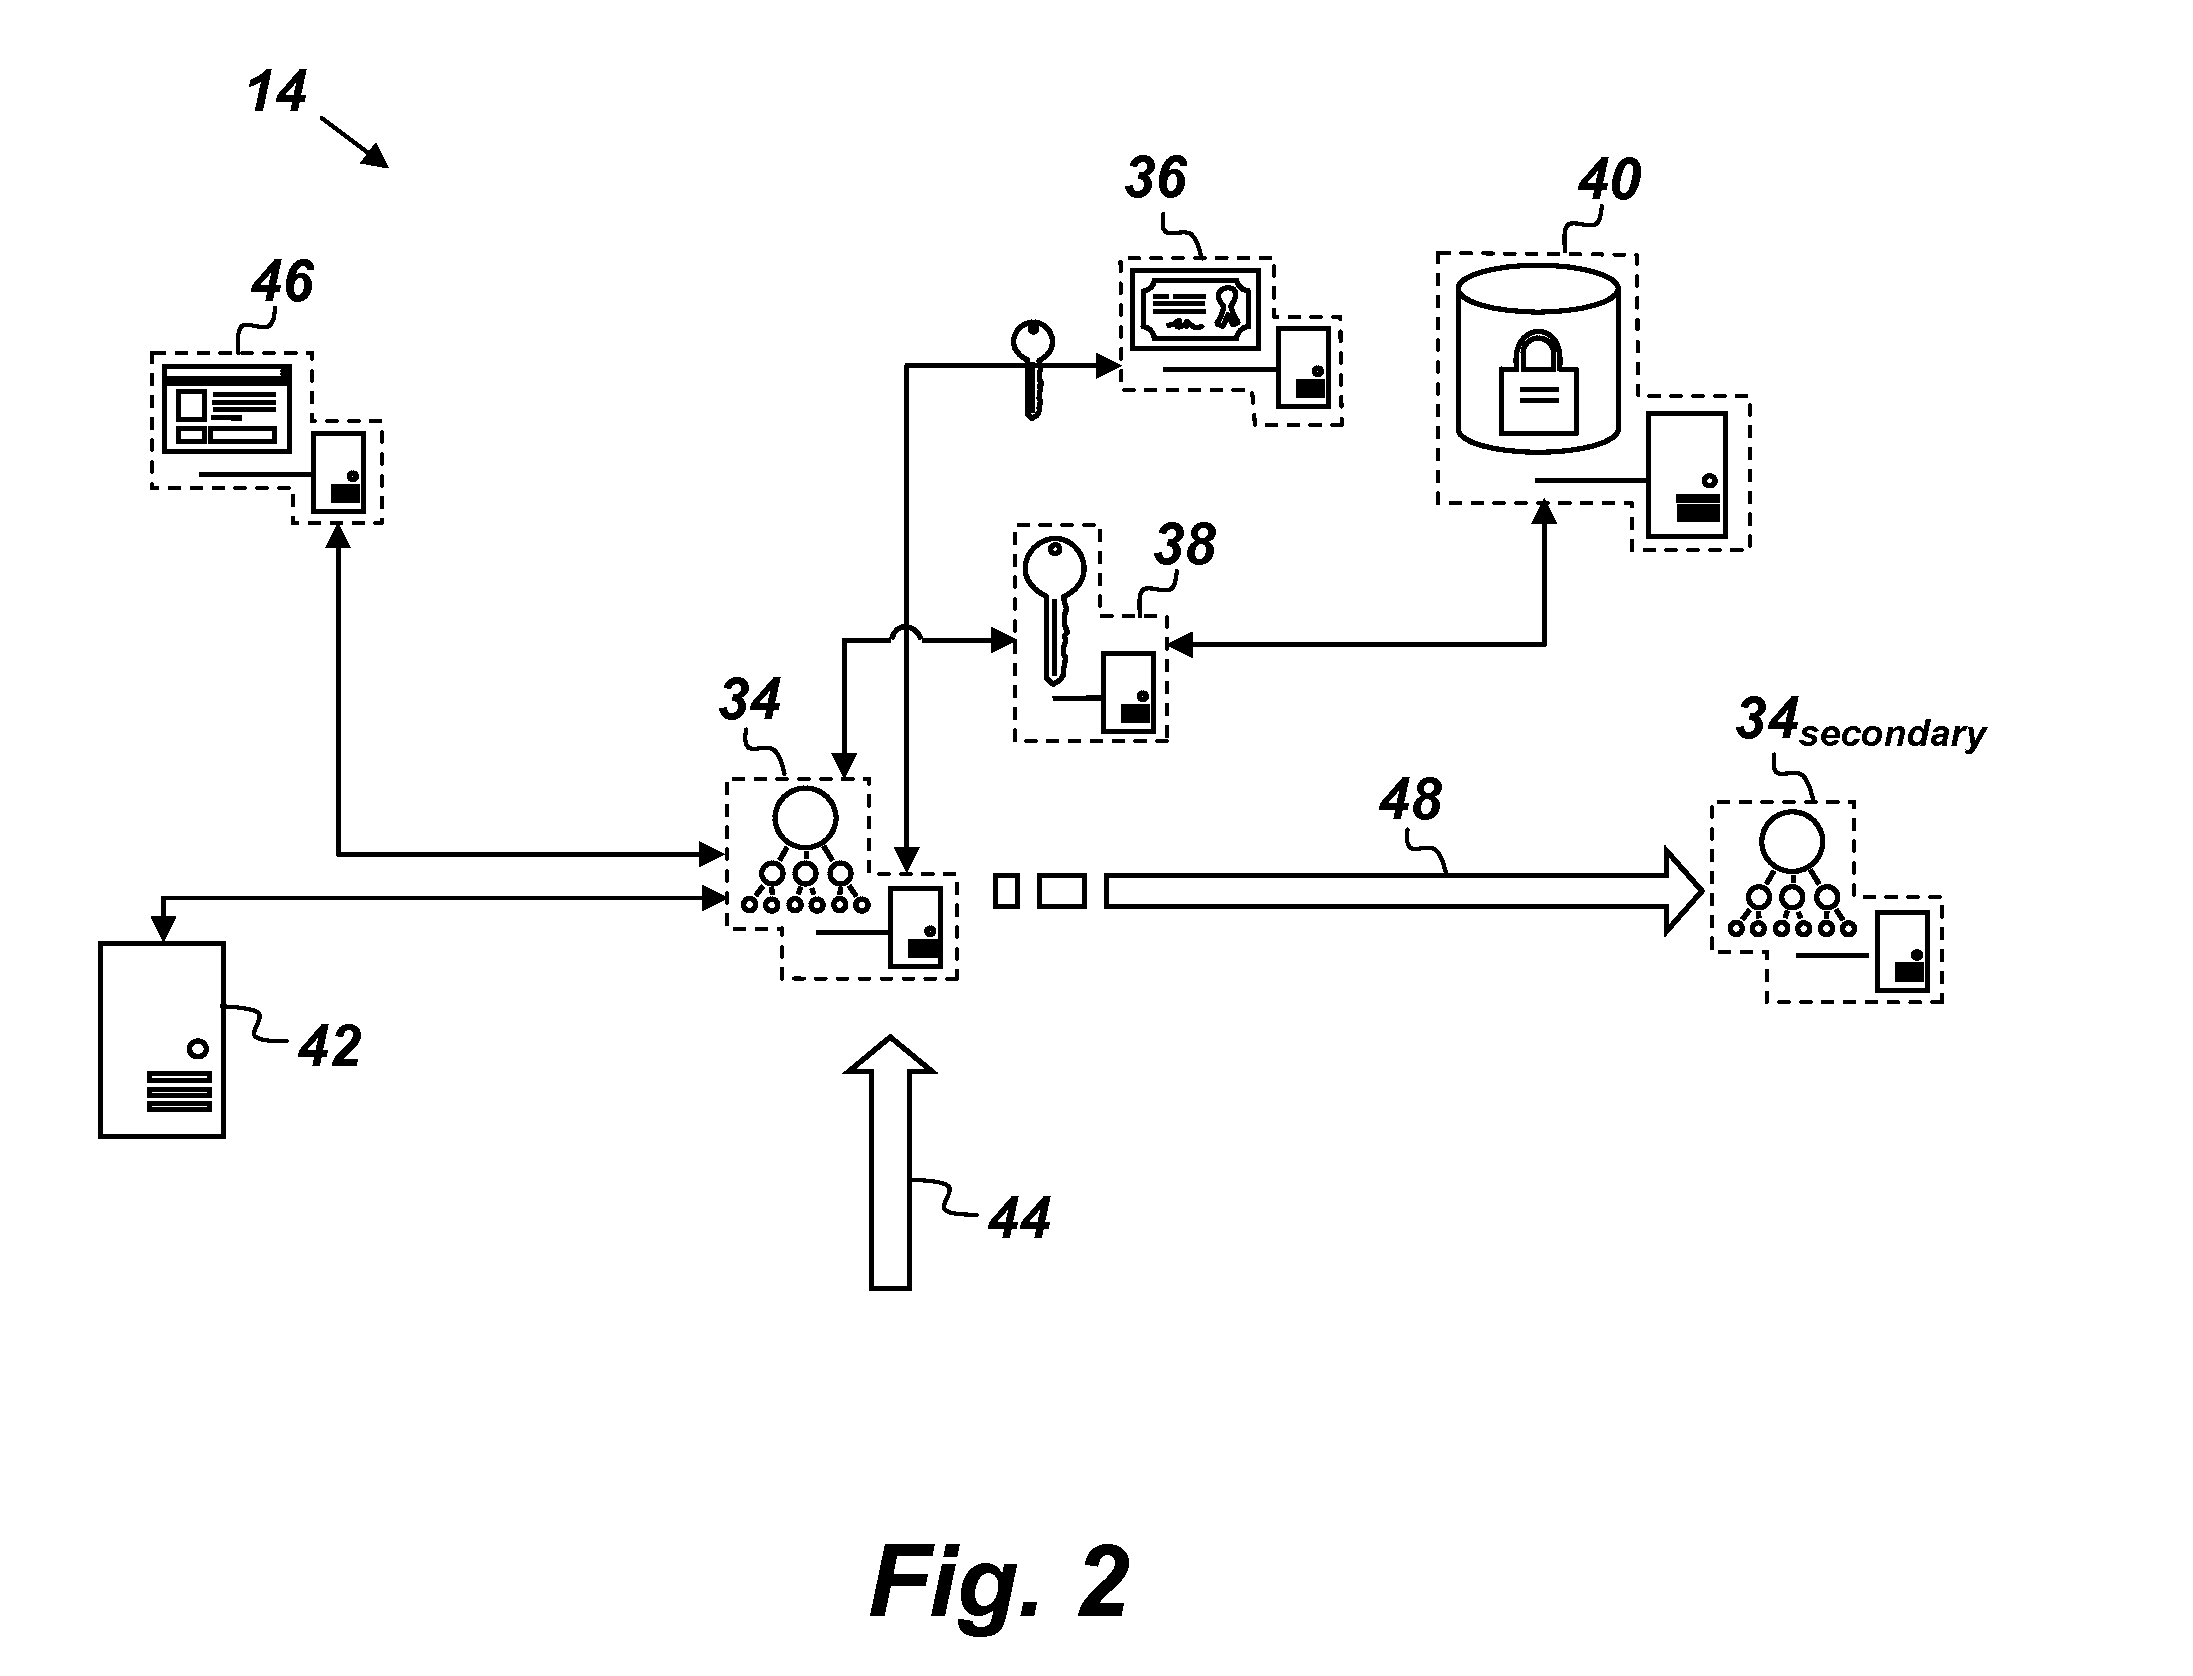 System and Method for High-Assurance Data Storage and Processing based on Homomorphic Encryption